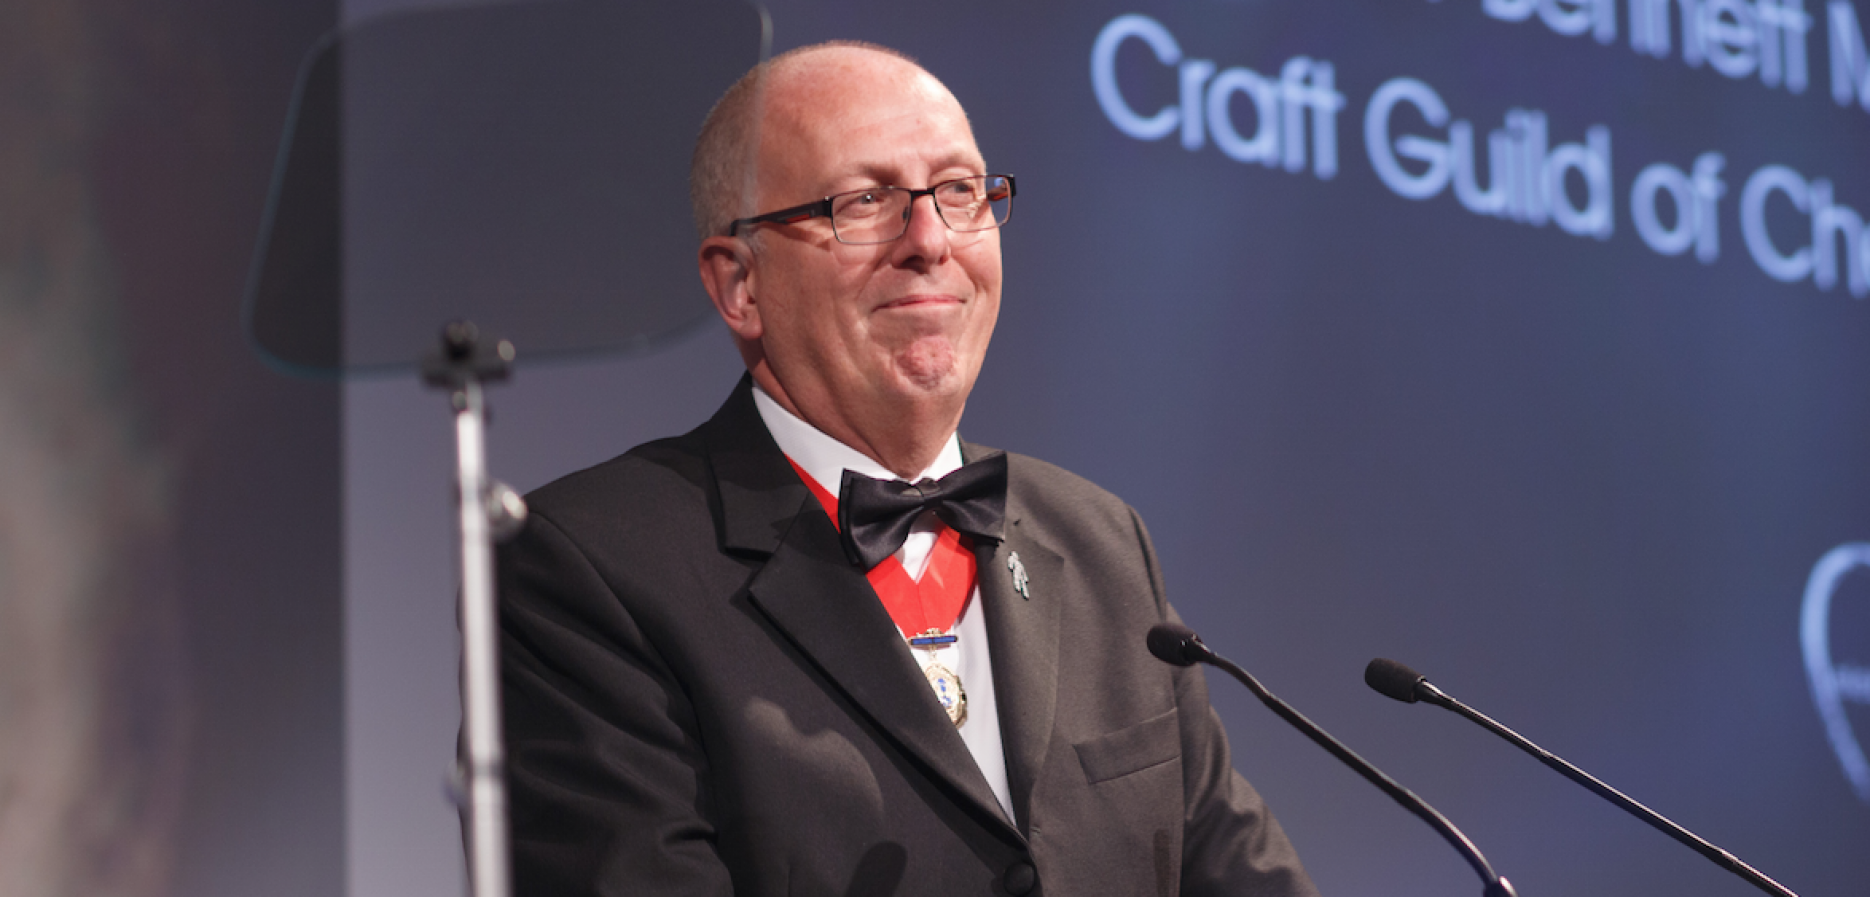 Andrew Bennett MBE, national chair of the Craft Guild of Chefs